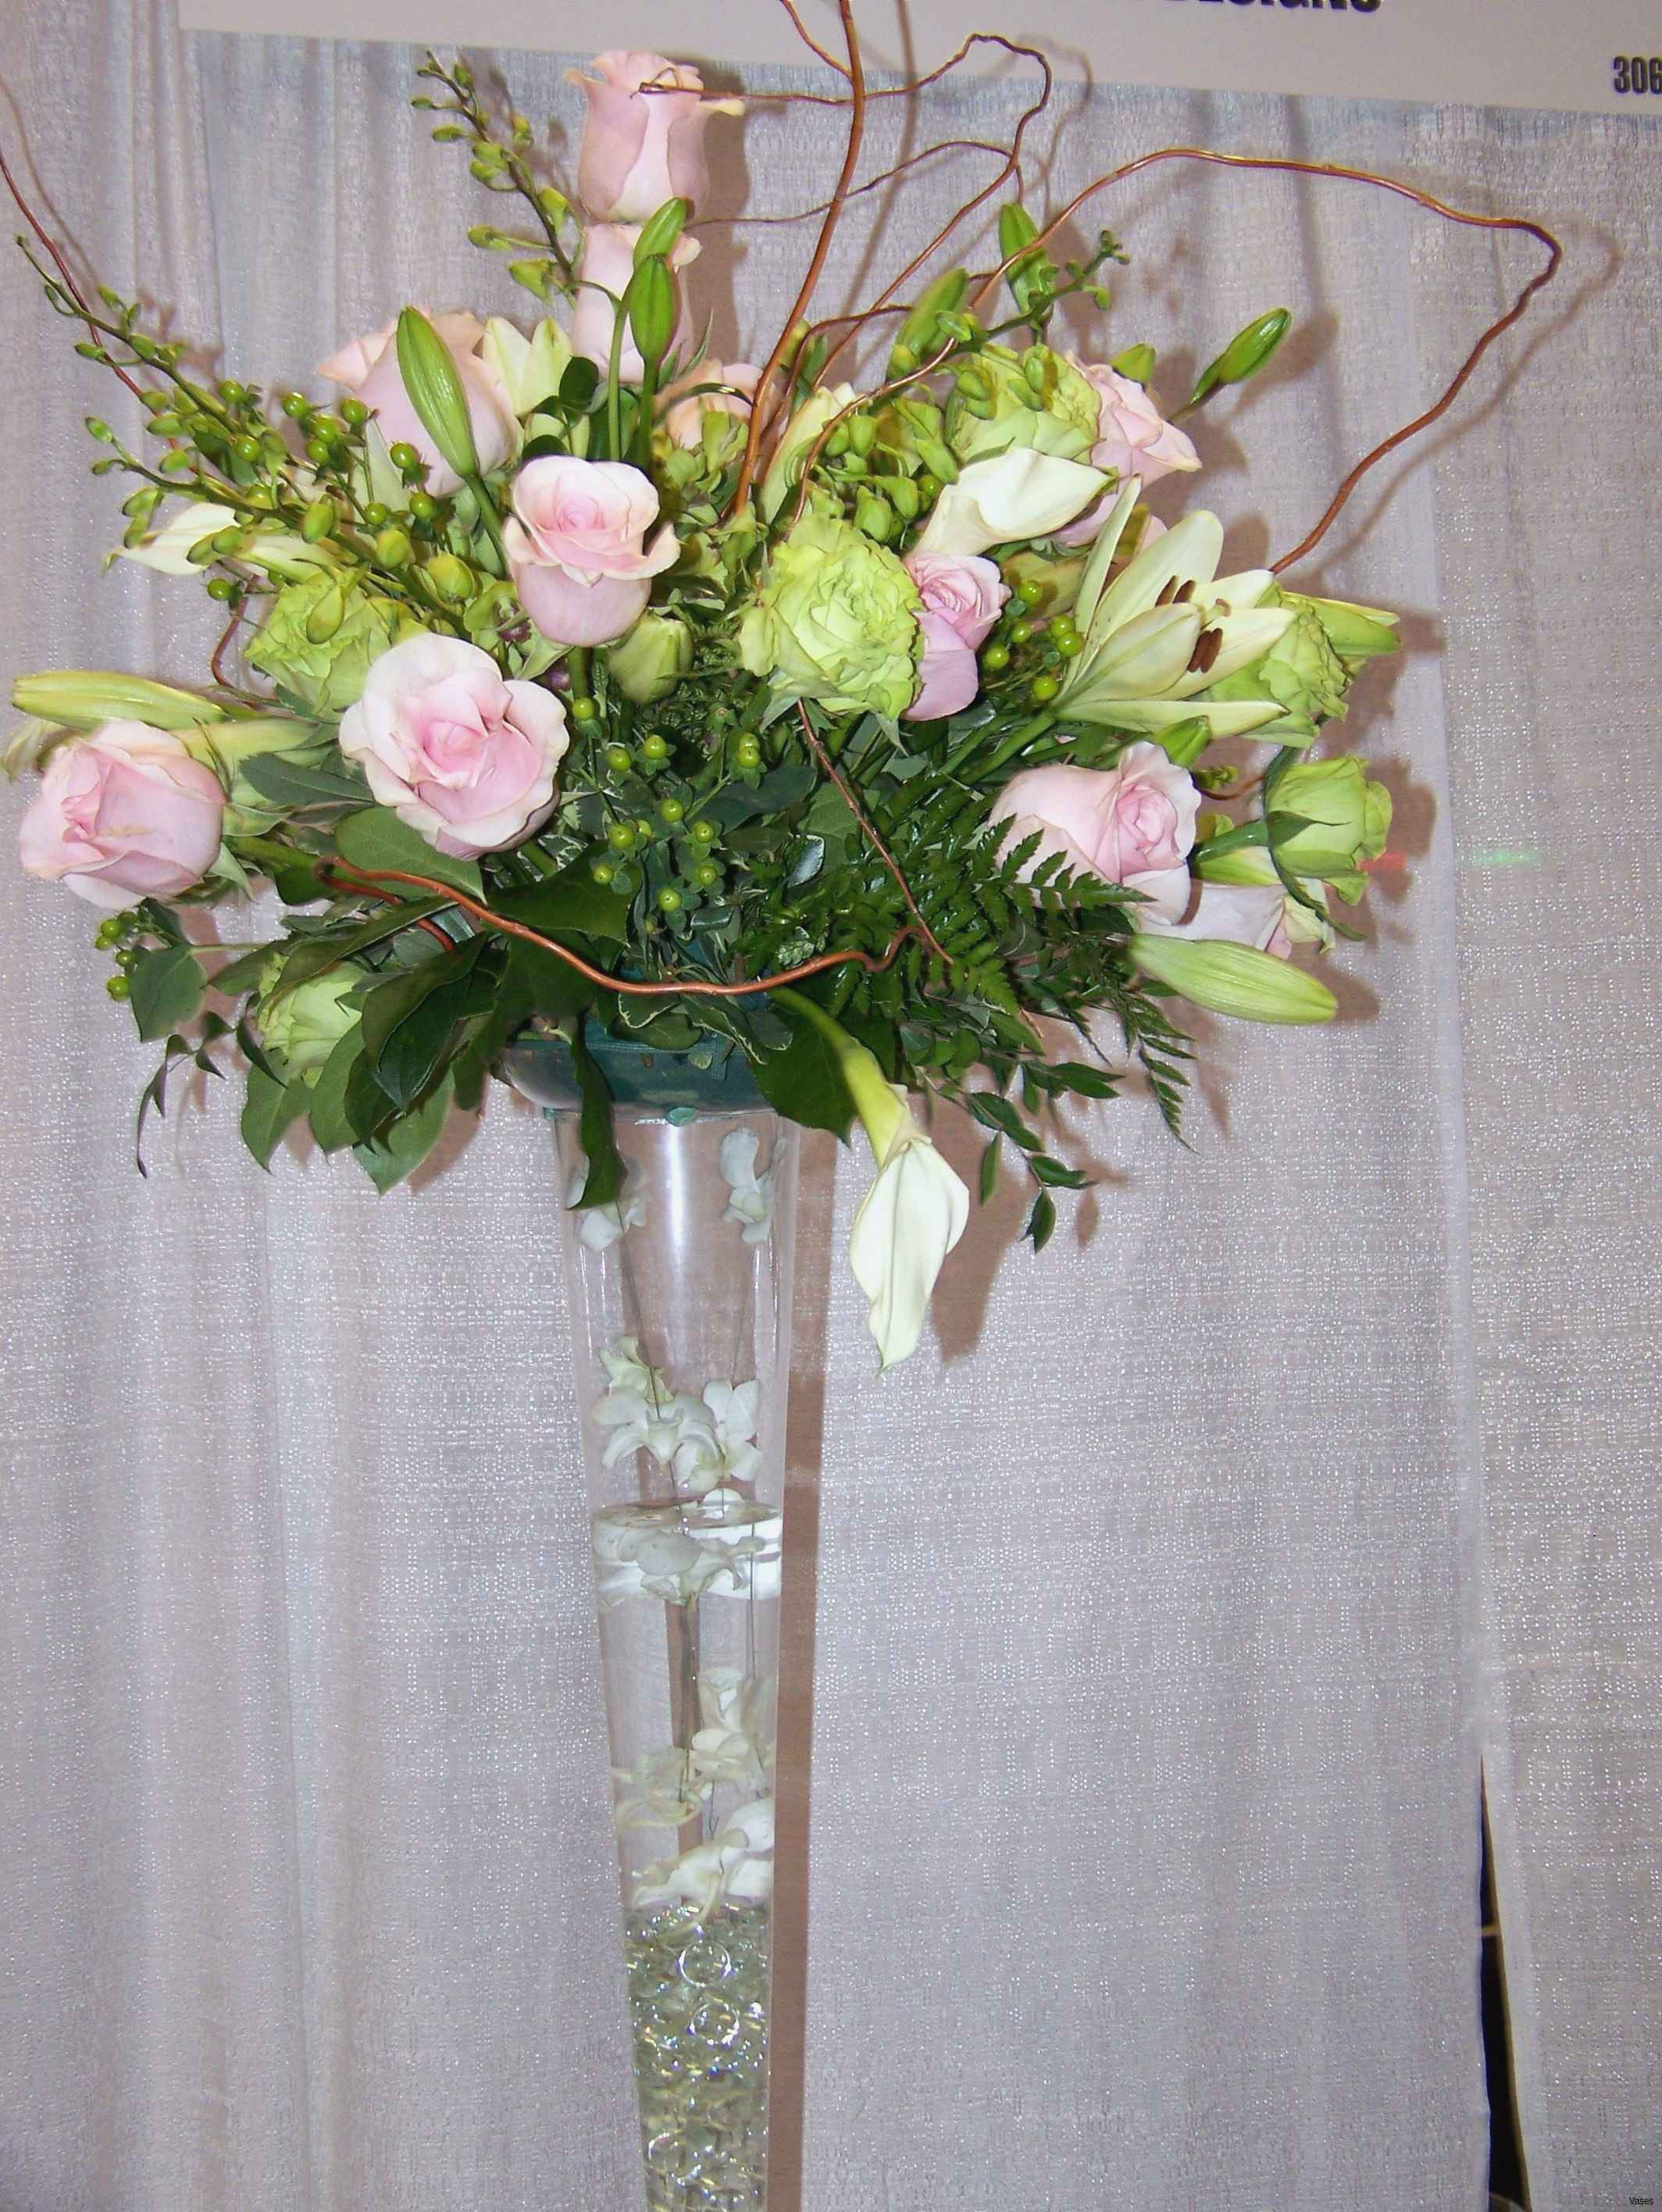 30 Cute Blush Pink Flowers In Vase 2024 free download blush pink flowers in vase of elegant fall wedding bouquet wedding theme within h vases ideas for floral arrangements in i 0d design ideas design inspiration rustic fall